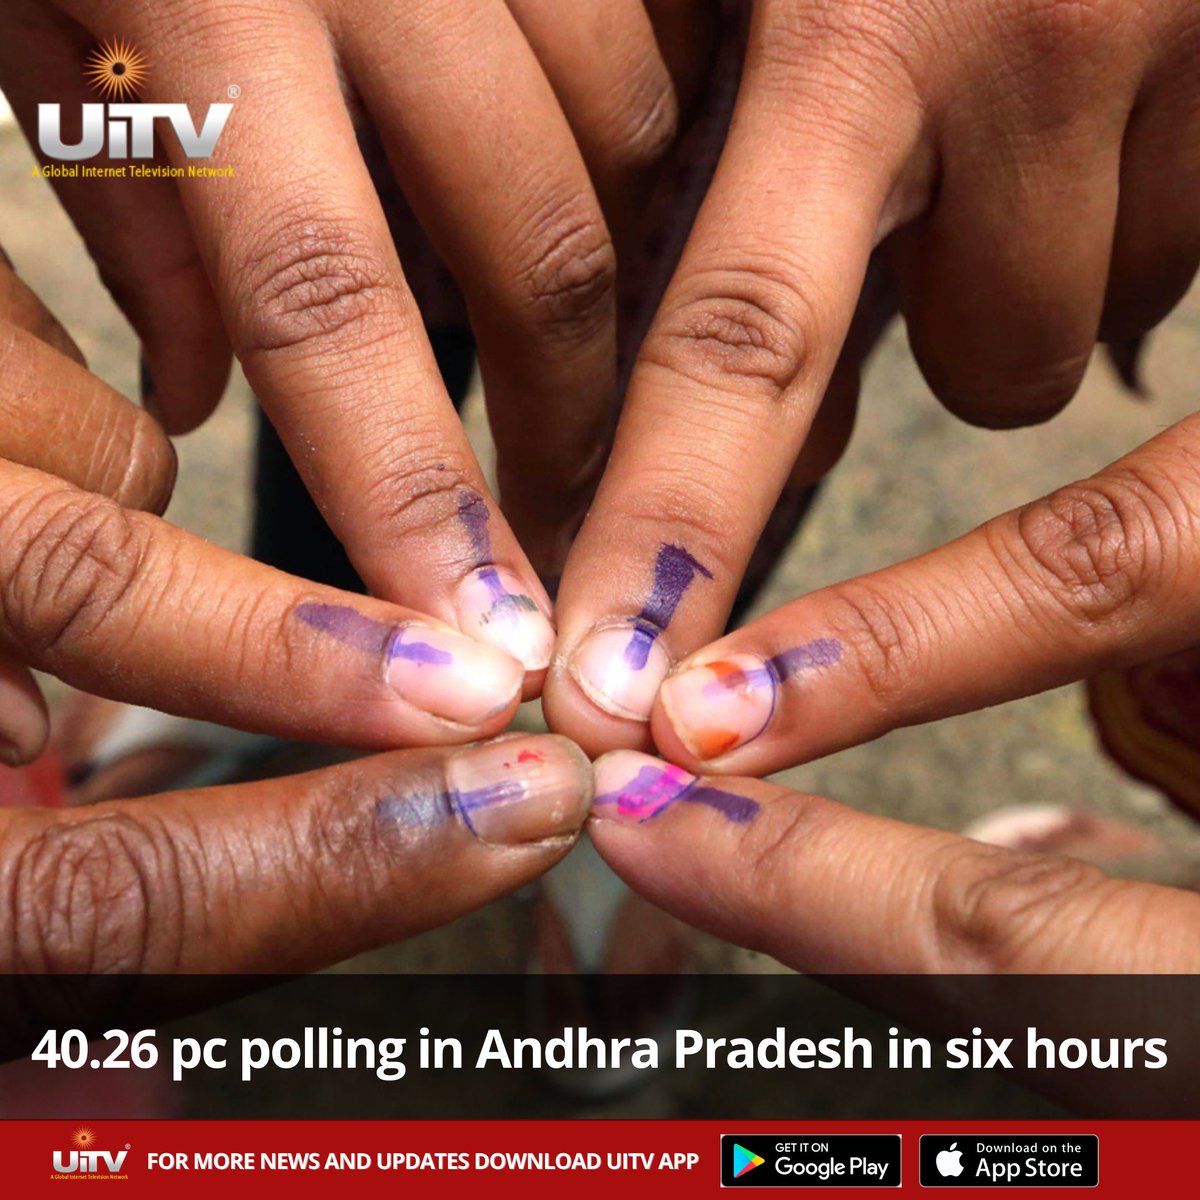 🗳️ Impressive turnout in Andhra Pradesh! Within just six hours, 40.26% of voters have exercised their democratic right. Let's keep up the momentum and ensure every voice is heard. Your vote shapes the future! 🌟 #AndhraVotes #ElectionDay #DemocracyInAction #YourVoteMatters